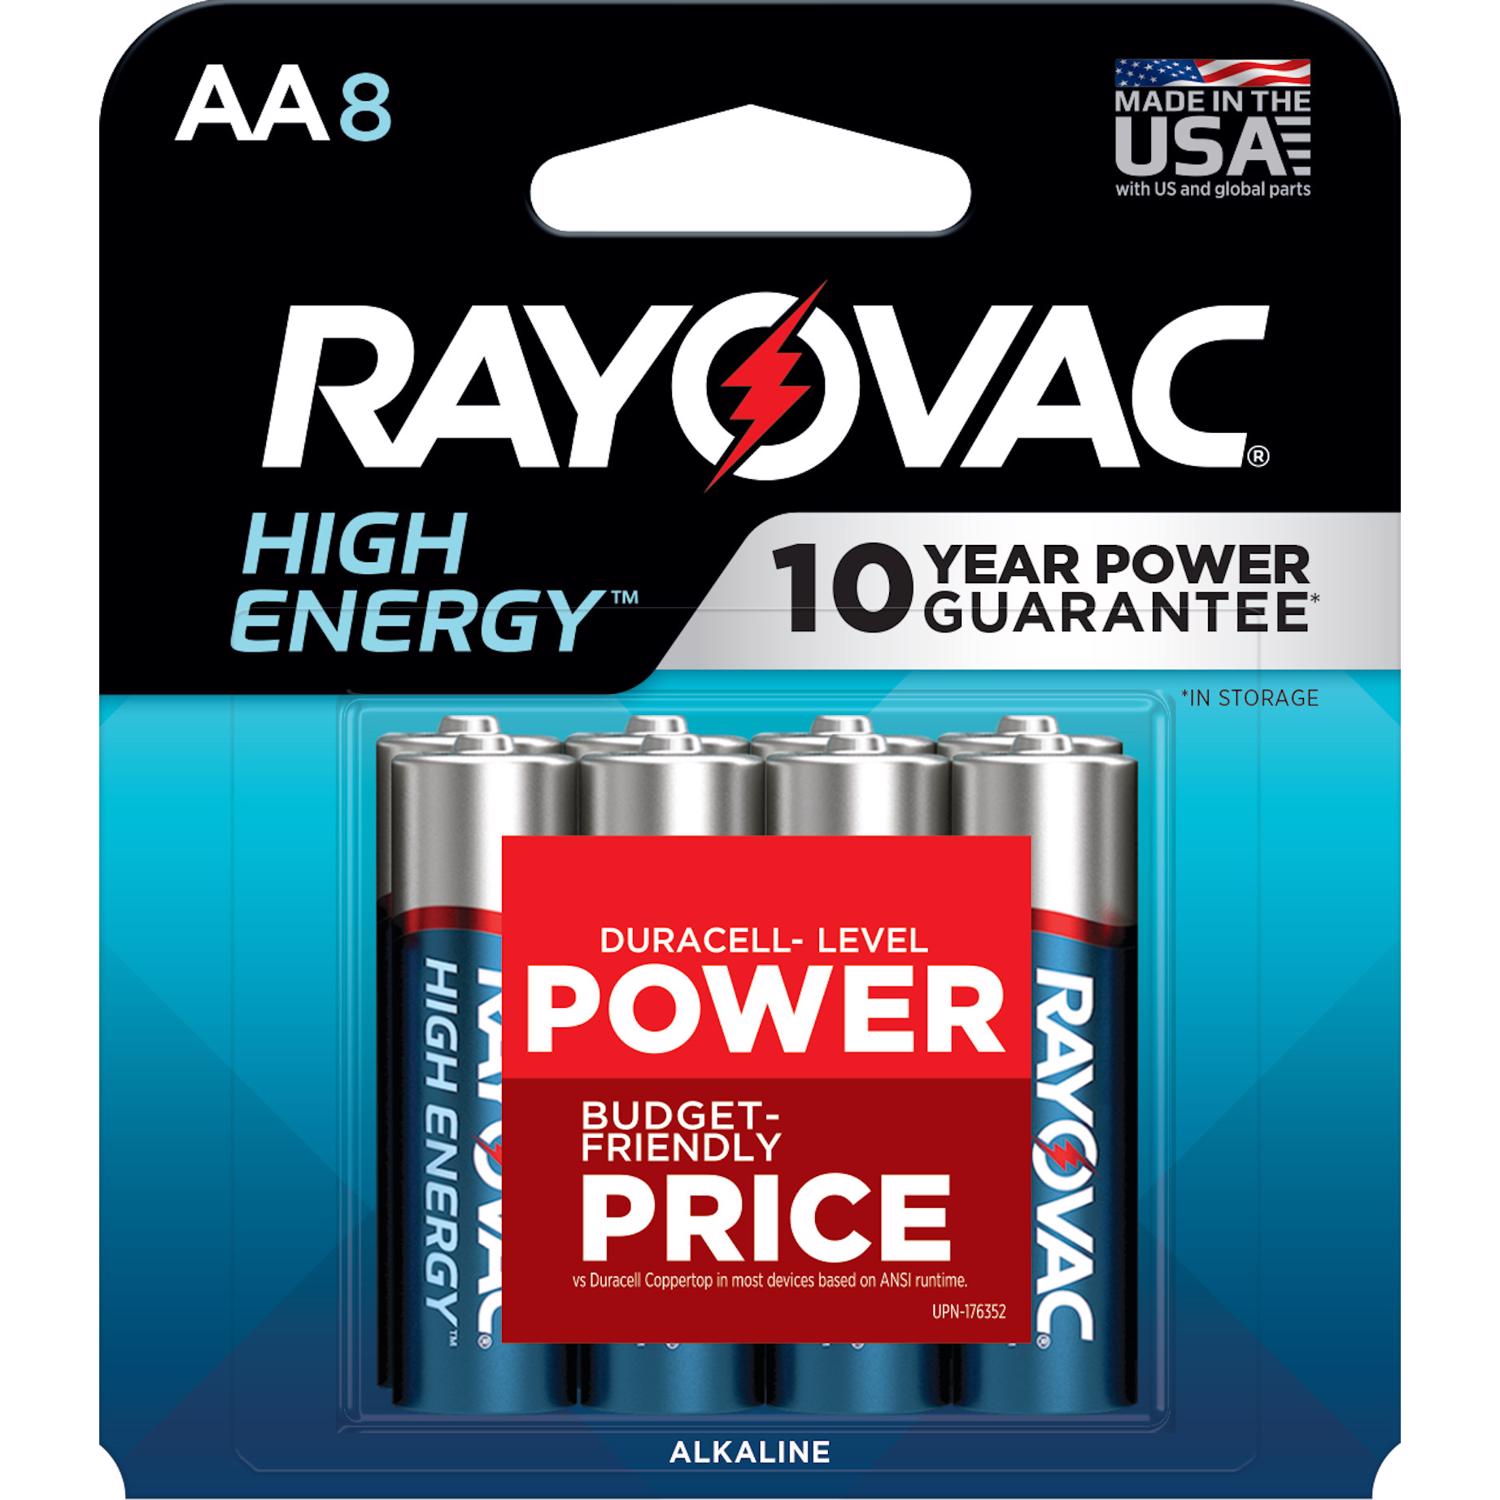 Photos - Household Switch Rayovac High Energy AA Alkaline Batteries 8 pk Carded 815-8T 